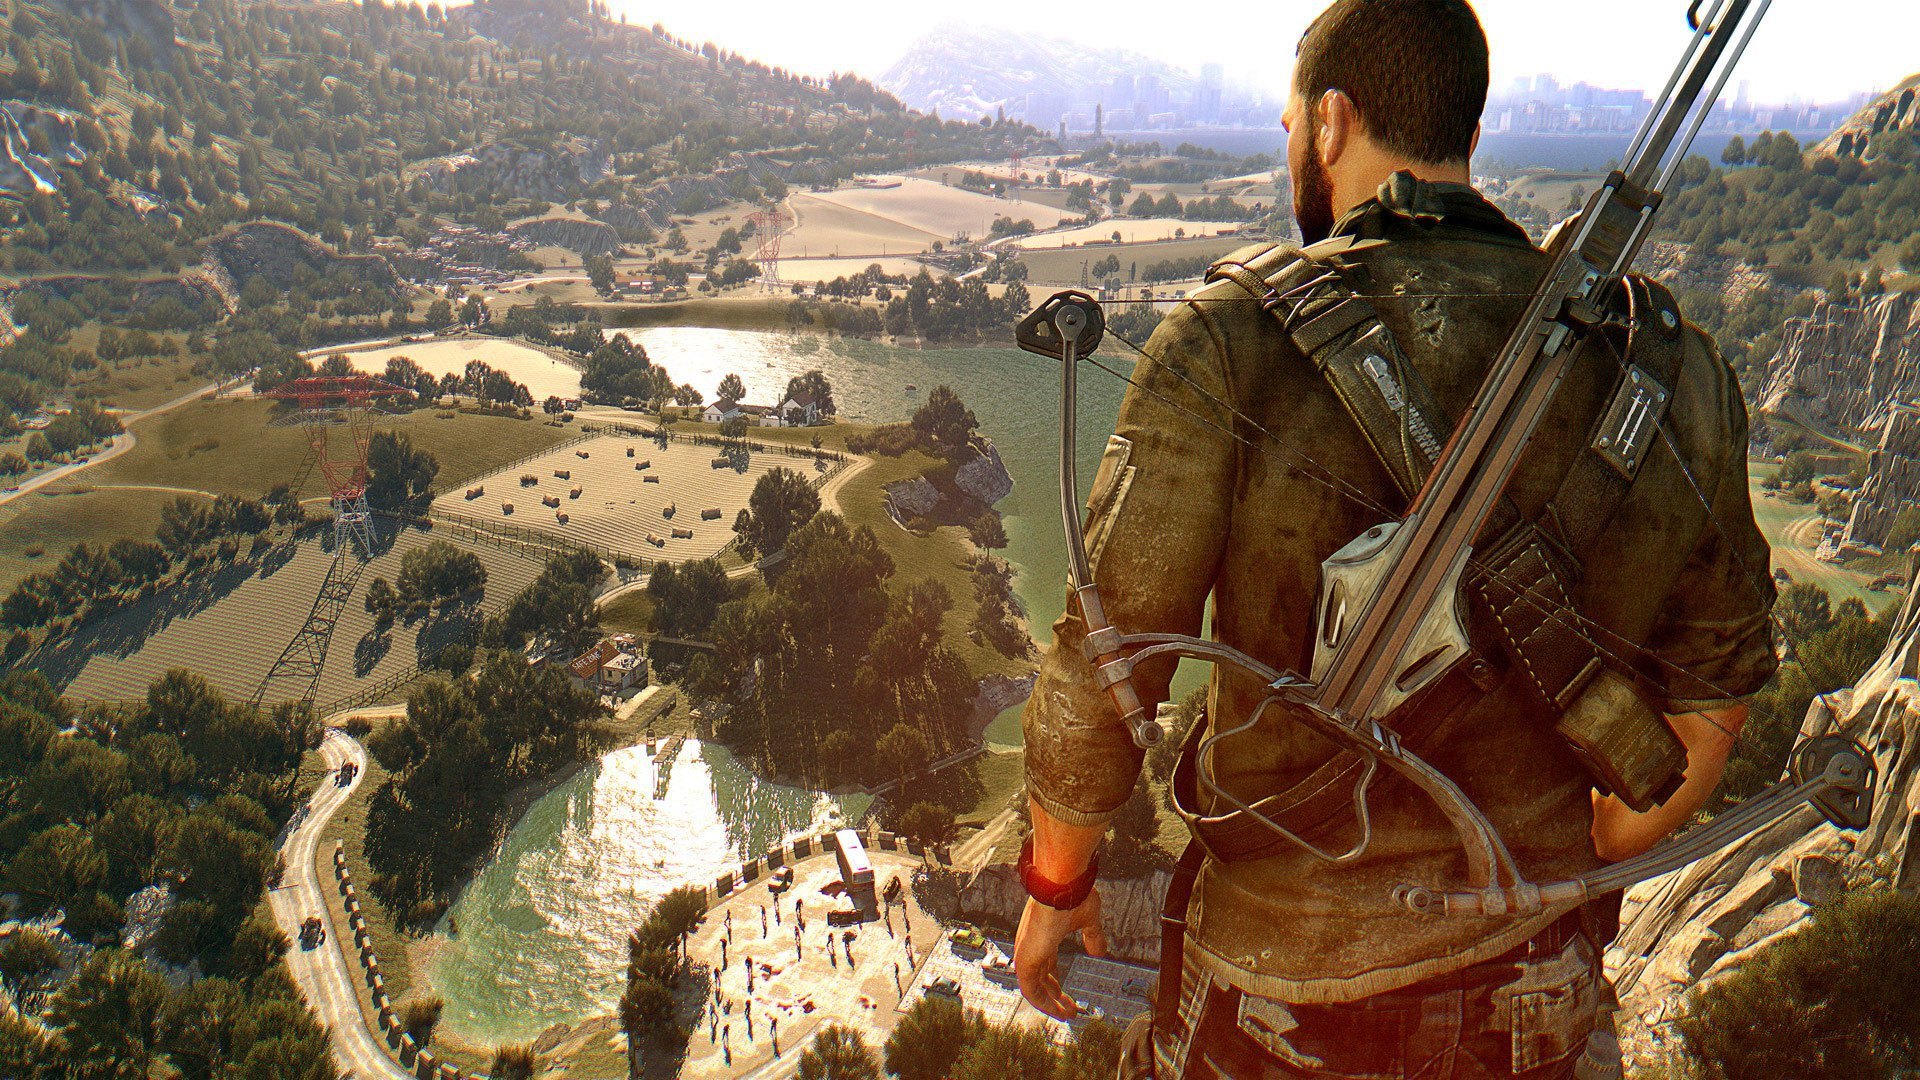 dying light wallpaper,soldier,army,screenshot,infantry,military